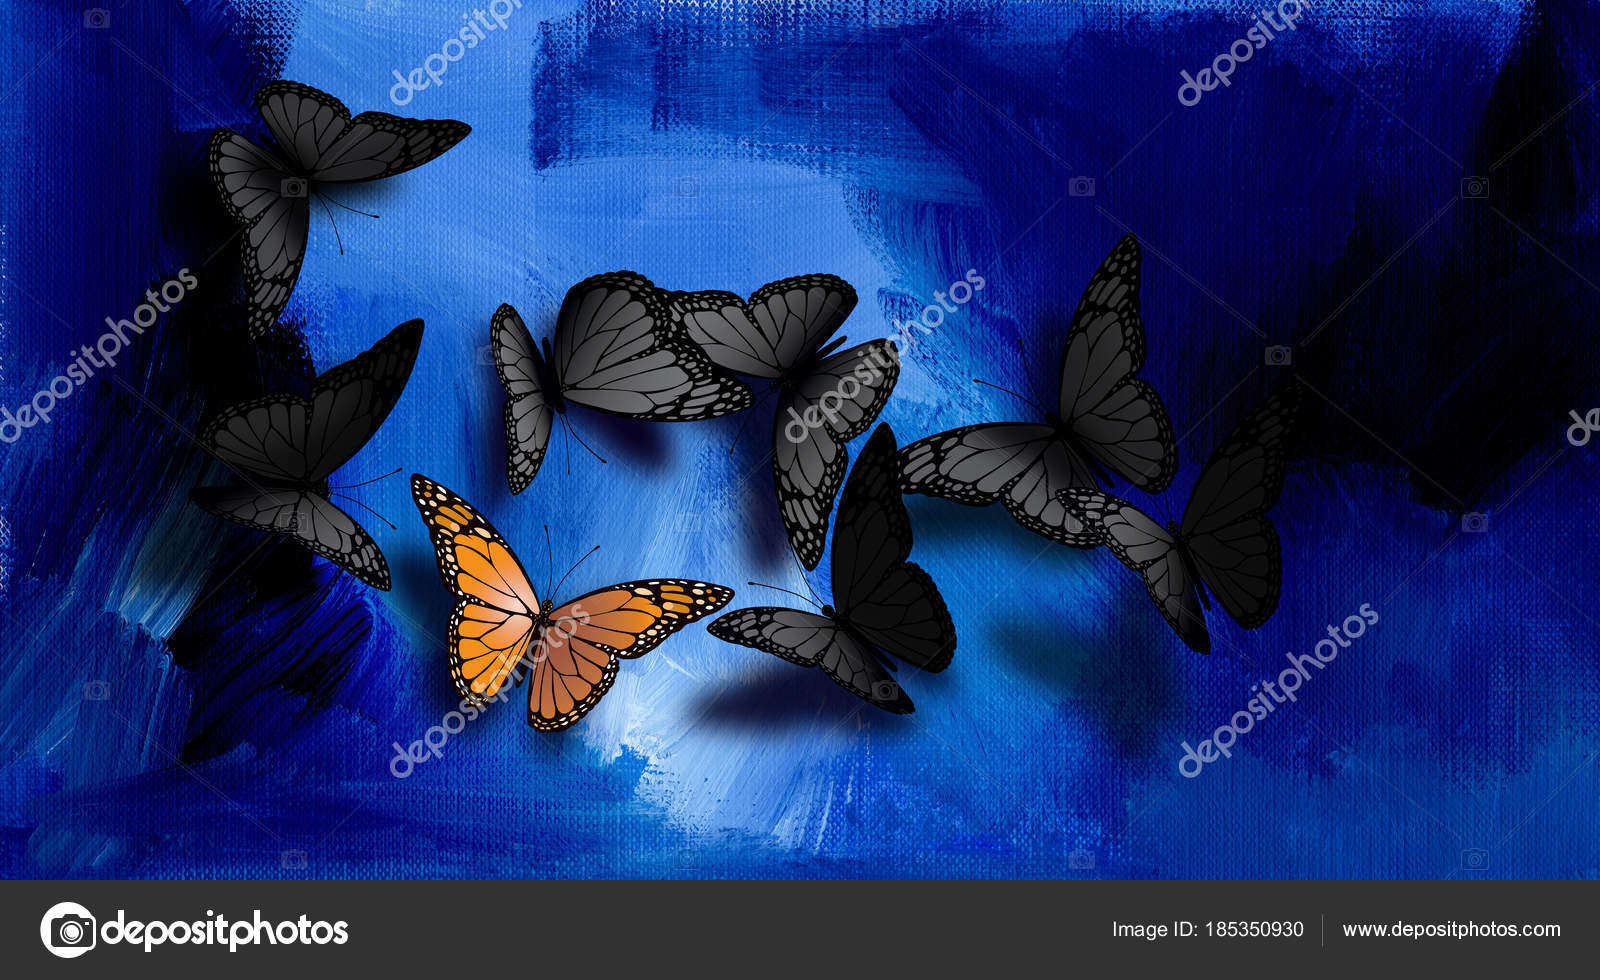 Butterfly black background Stock Photos, Royalty Free Butterfly black  background Images | Depositphotos